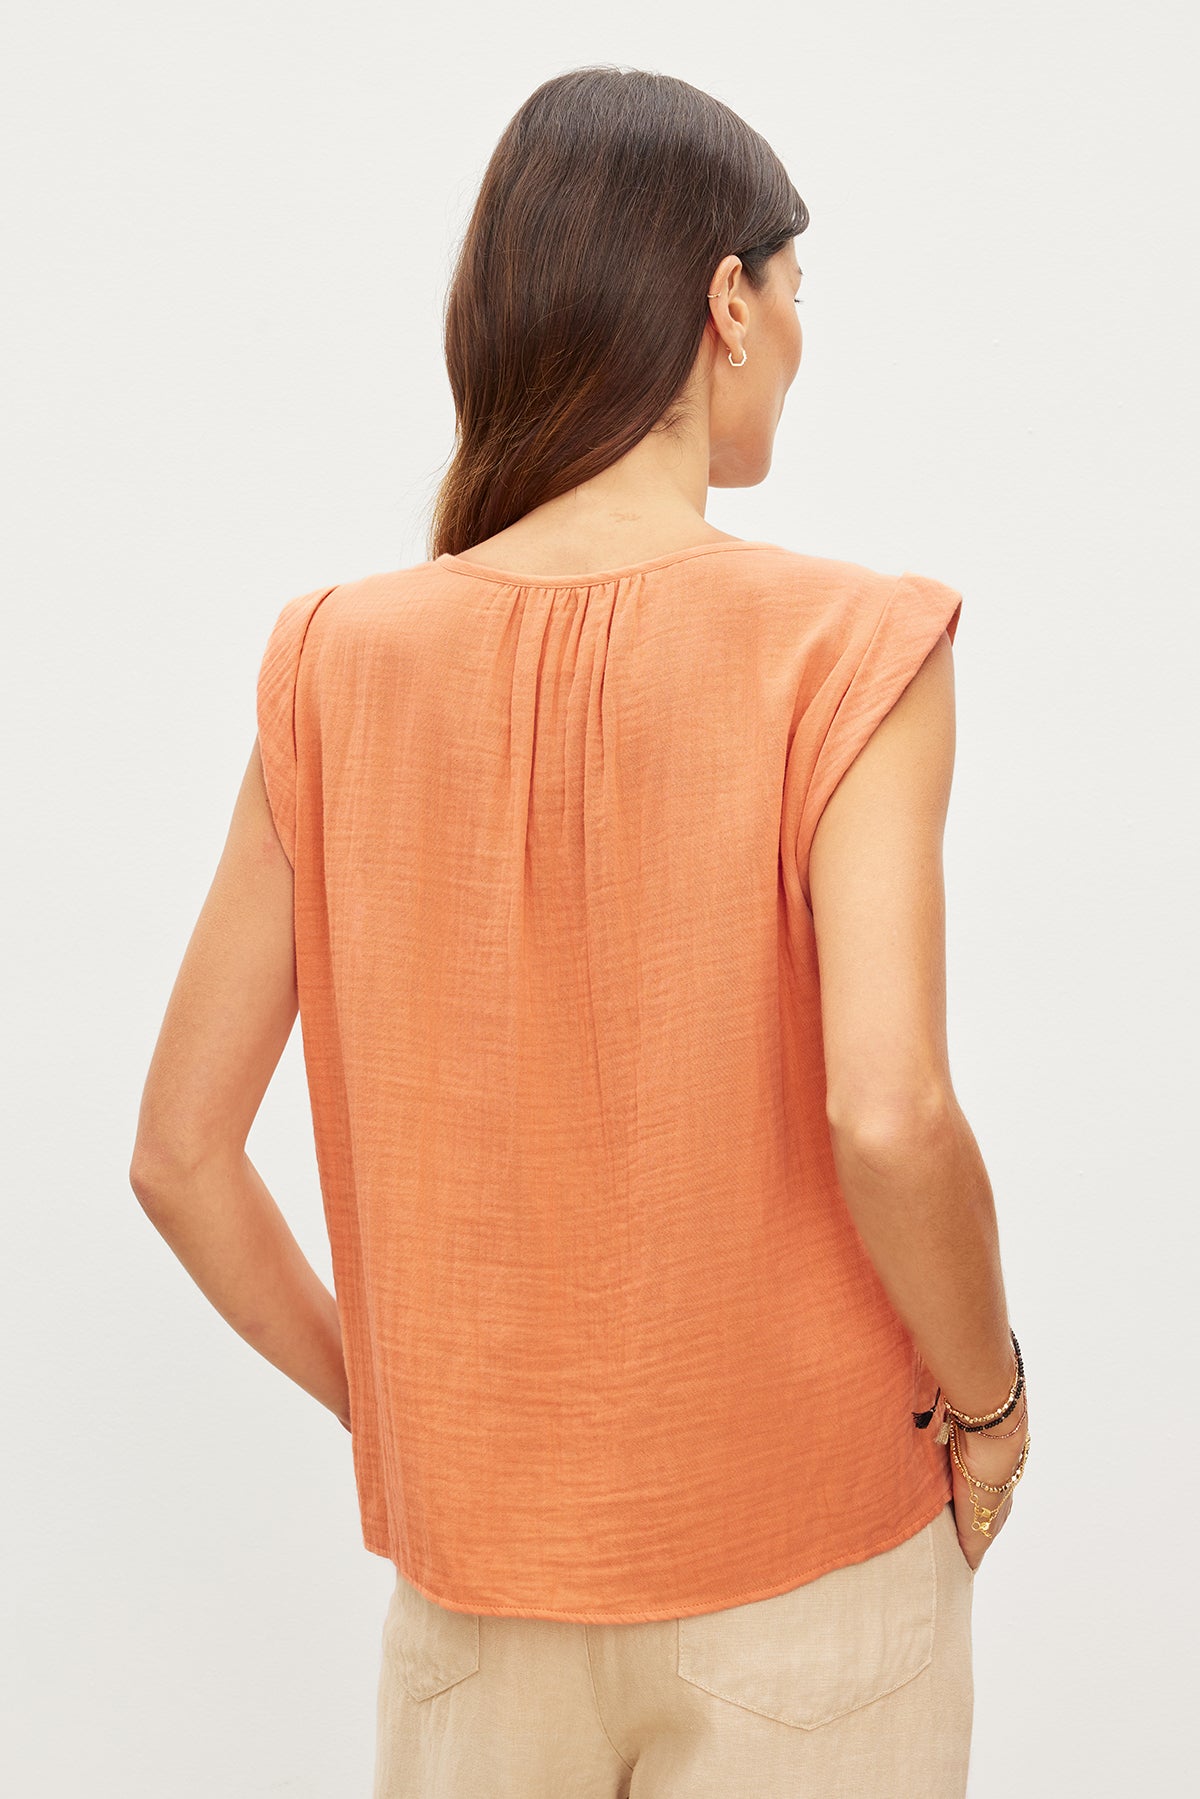   A woman, seen from behind, dons a JAYLA COTTON GAUZE TANK TOP made by Velvet by Graham & Spencer. 